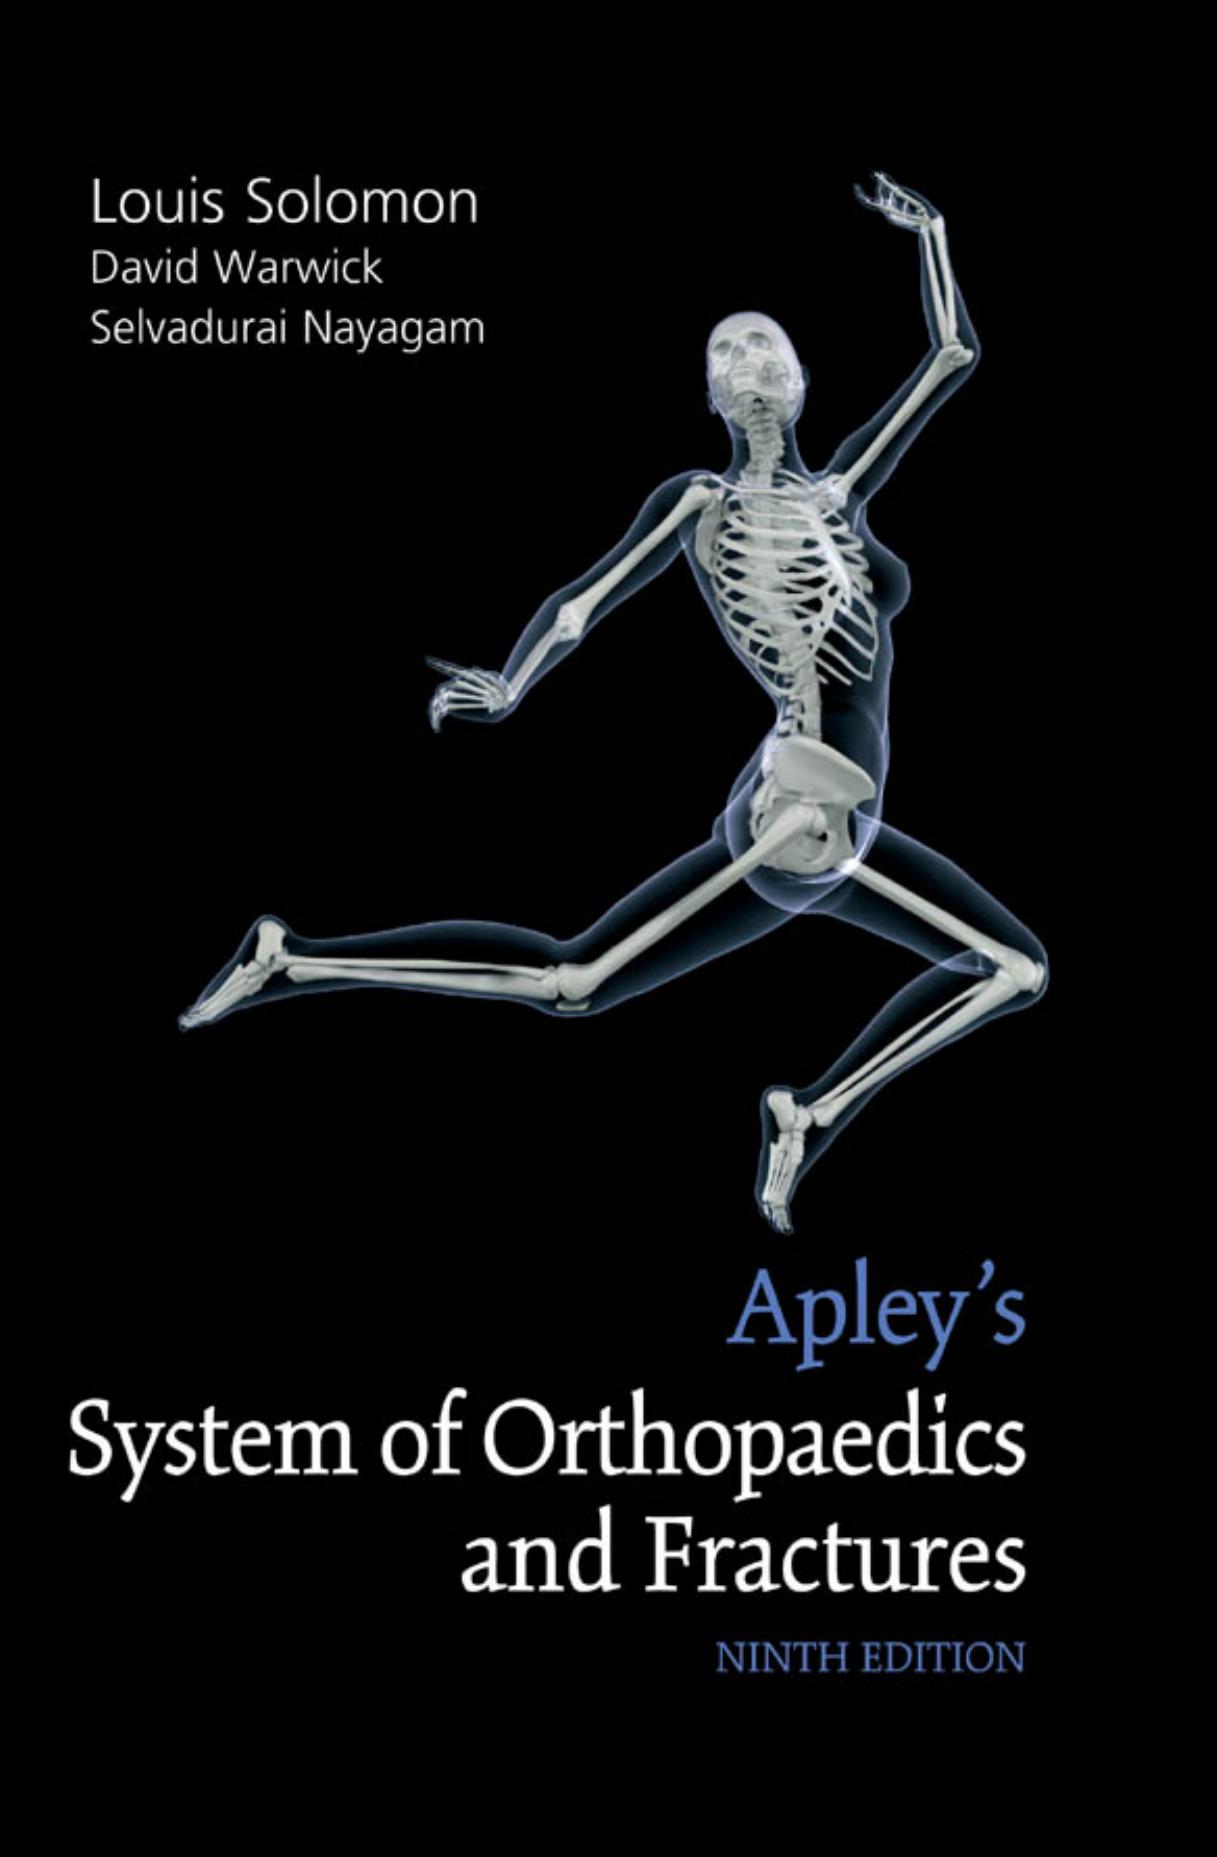 Apley's System of Orthopaedics and Fractures, 9th Edition - Wei Zhi.jpg